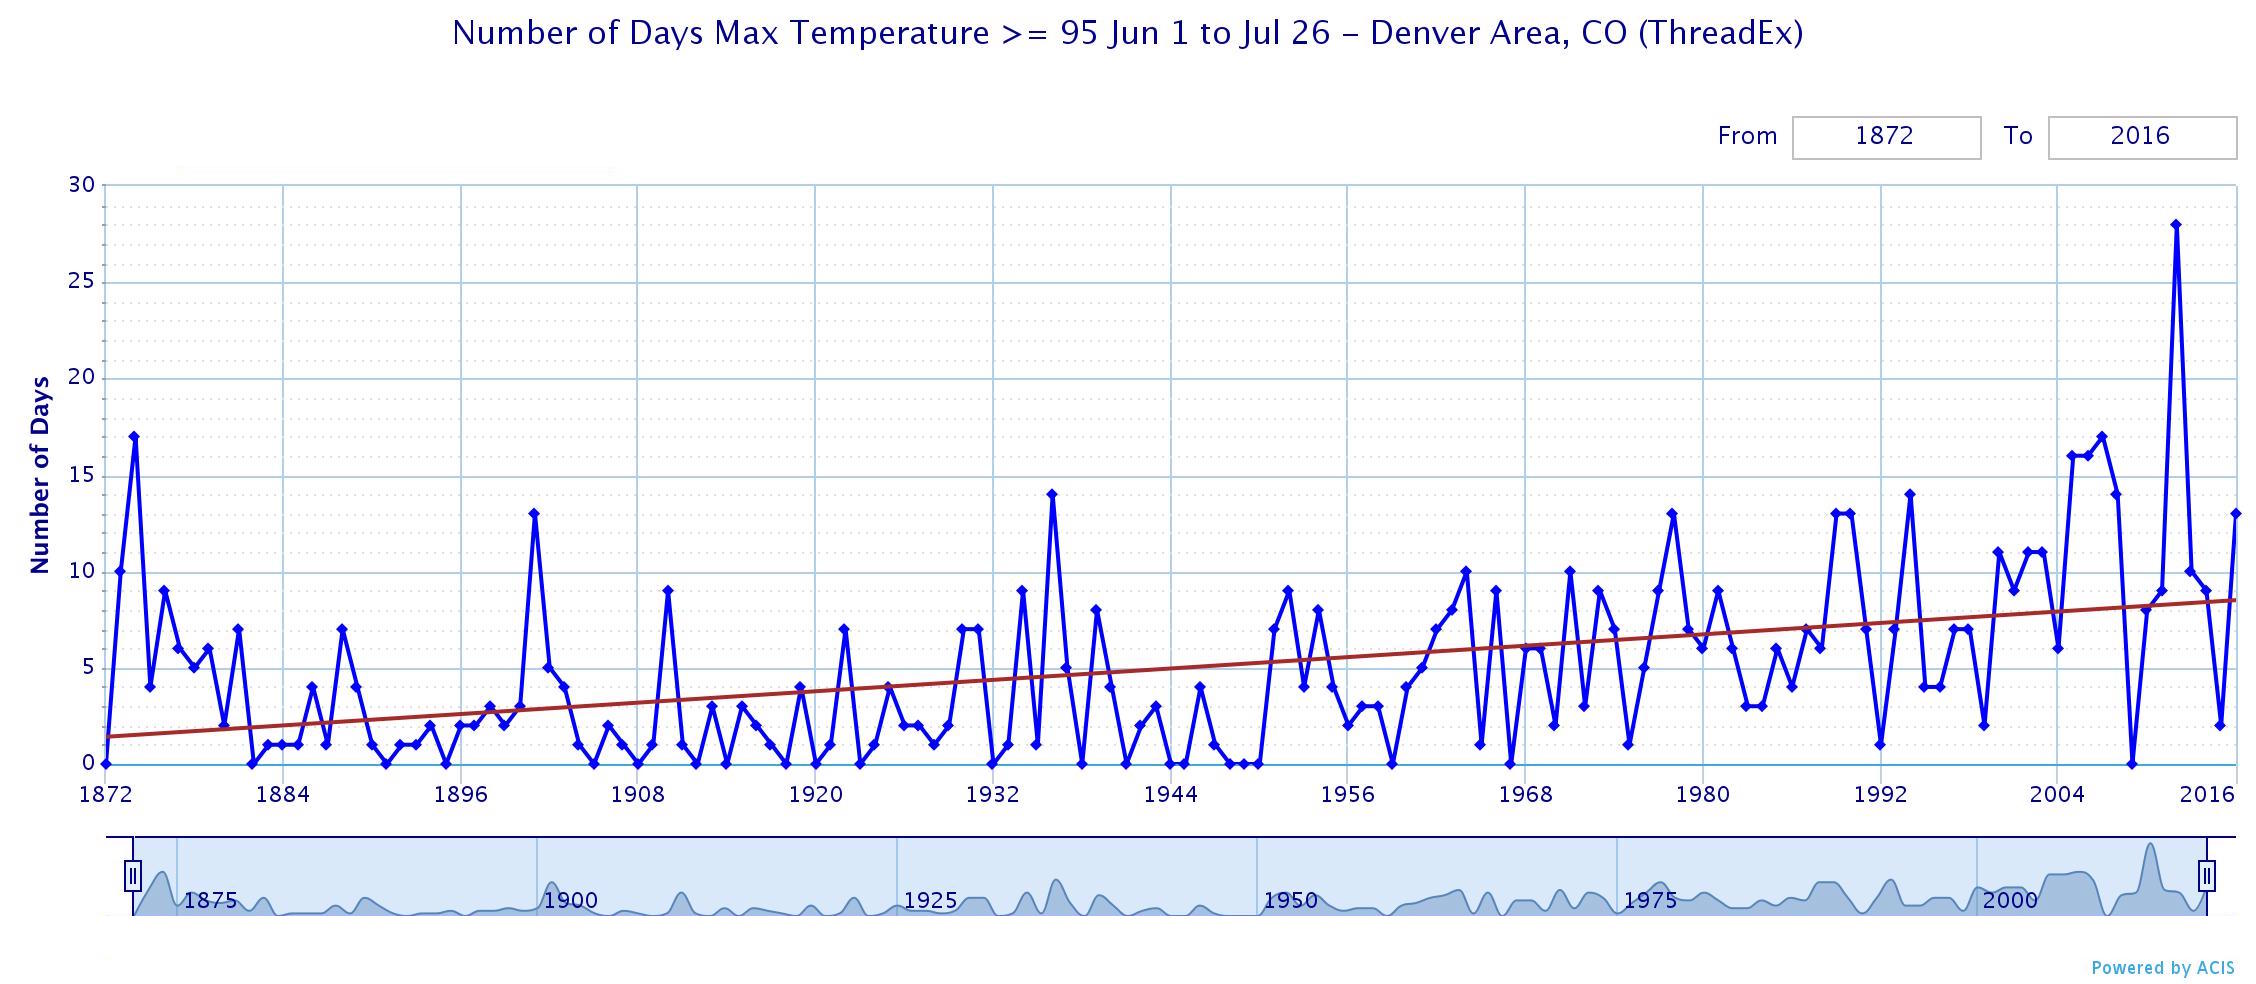 The chart above shows the number of days 95°F or warmer in Denver between June 1 and July 26 since record keeping began in 1872.| xmACIS2